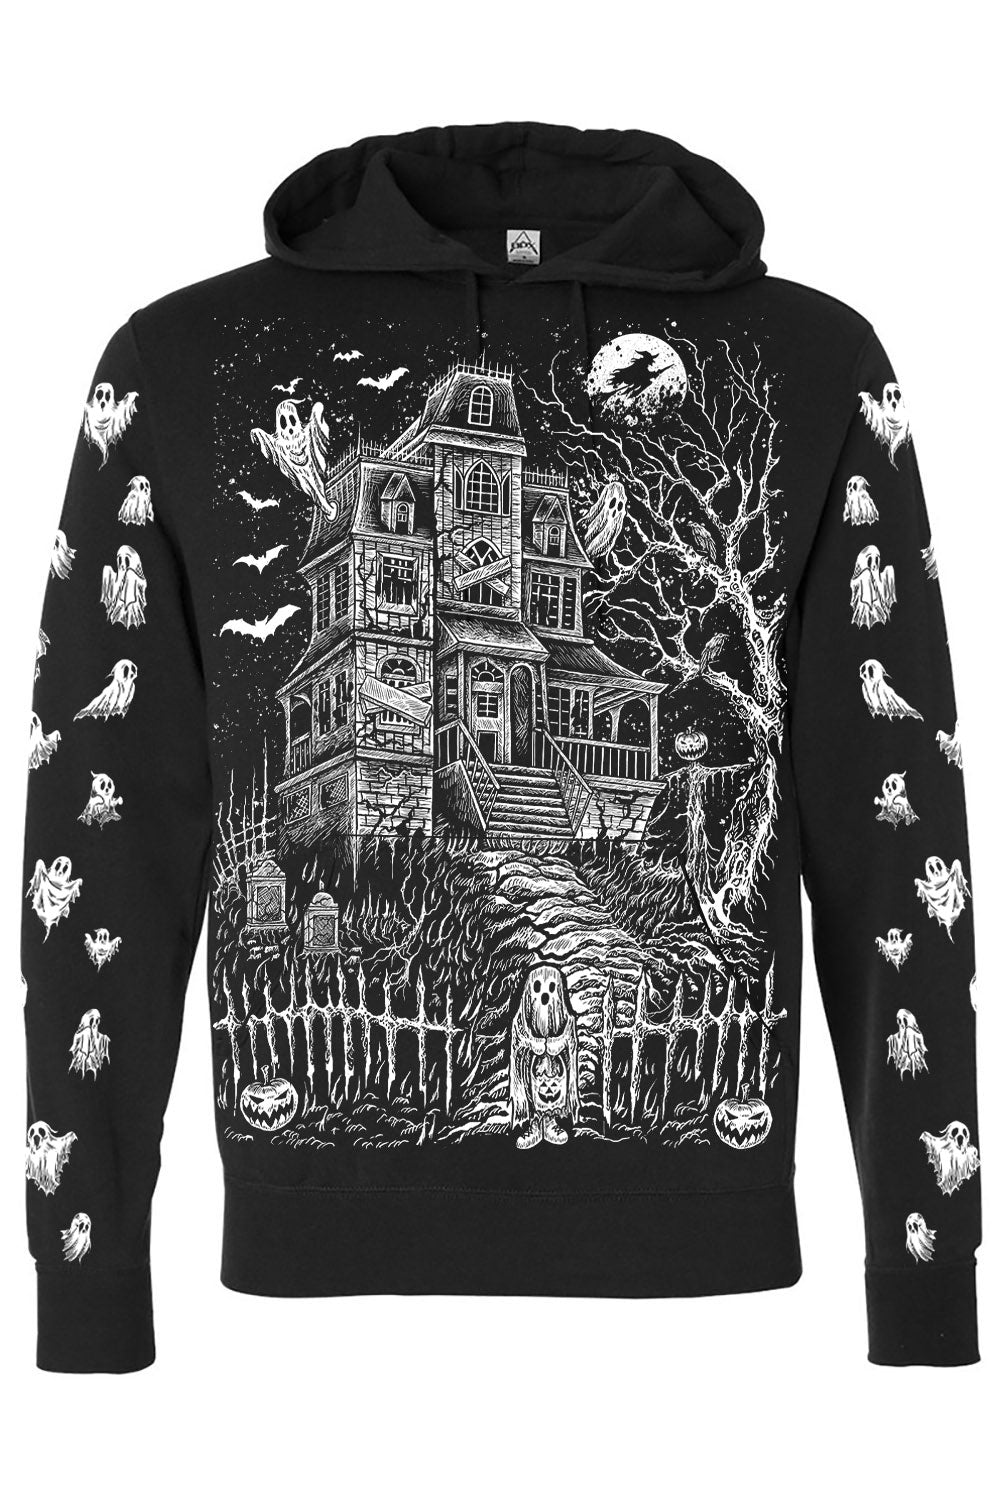 Haunted Mansion Hoodie [Zipper or Pullover]